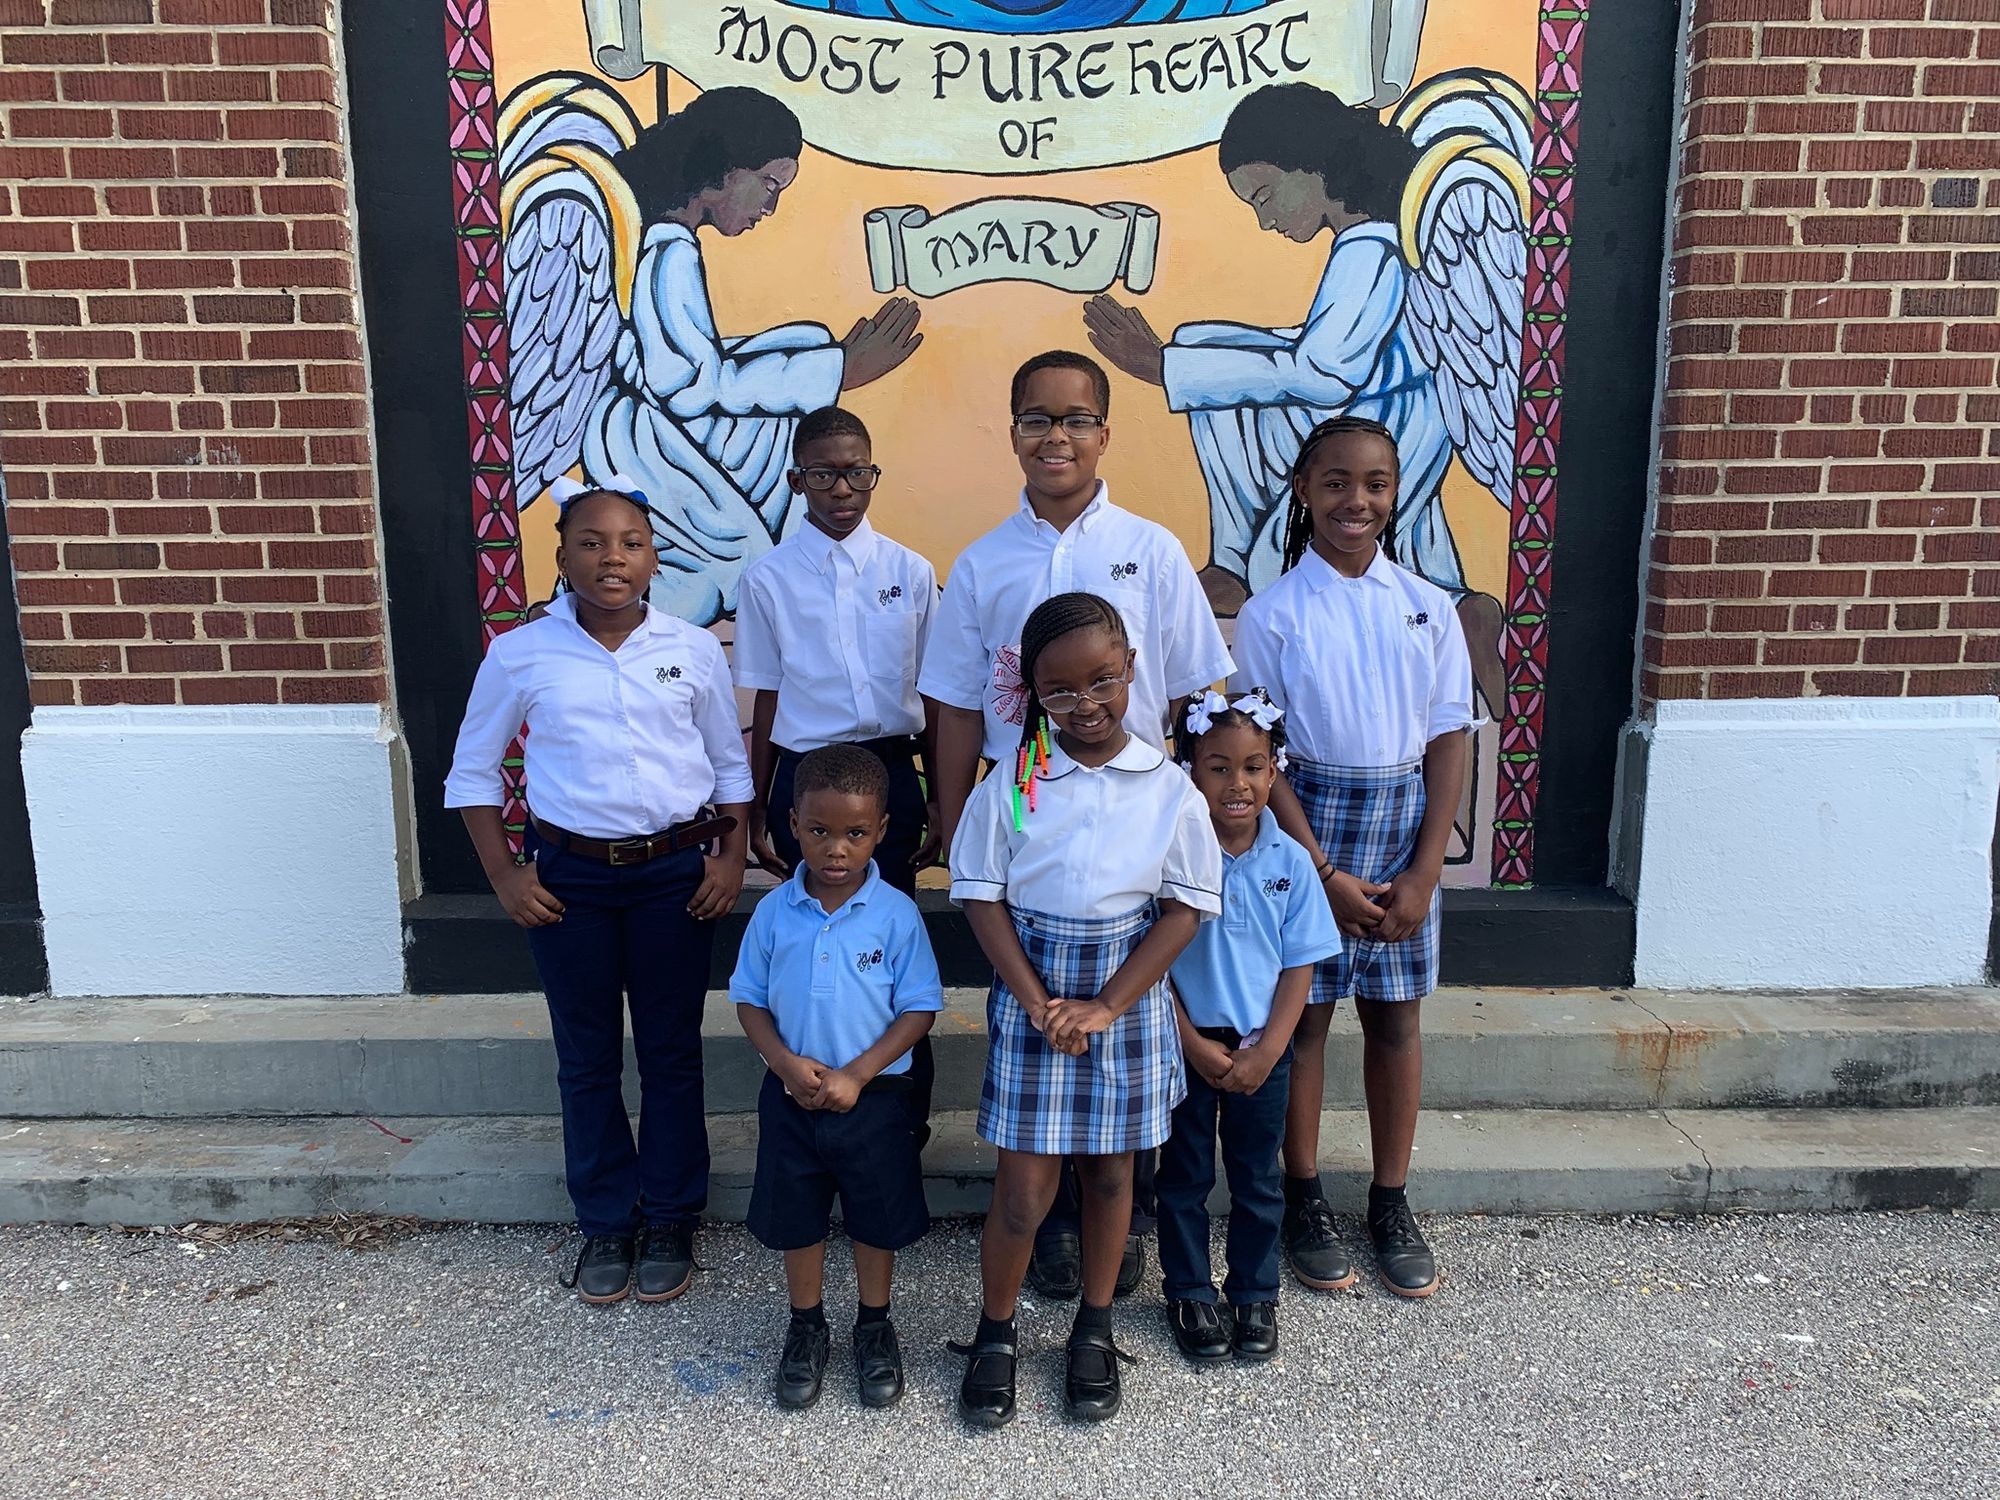 Explainer: Heart of Mary Catholic School in Mobile, Alabama to remain open